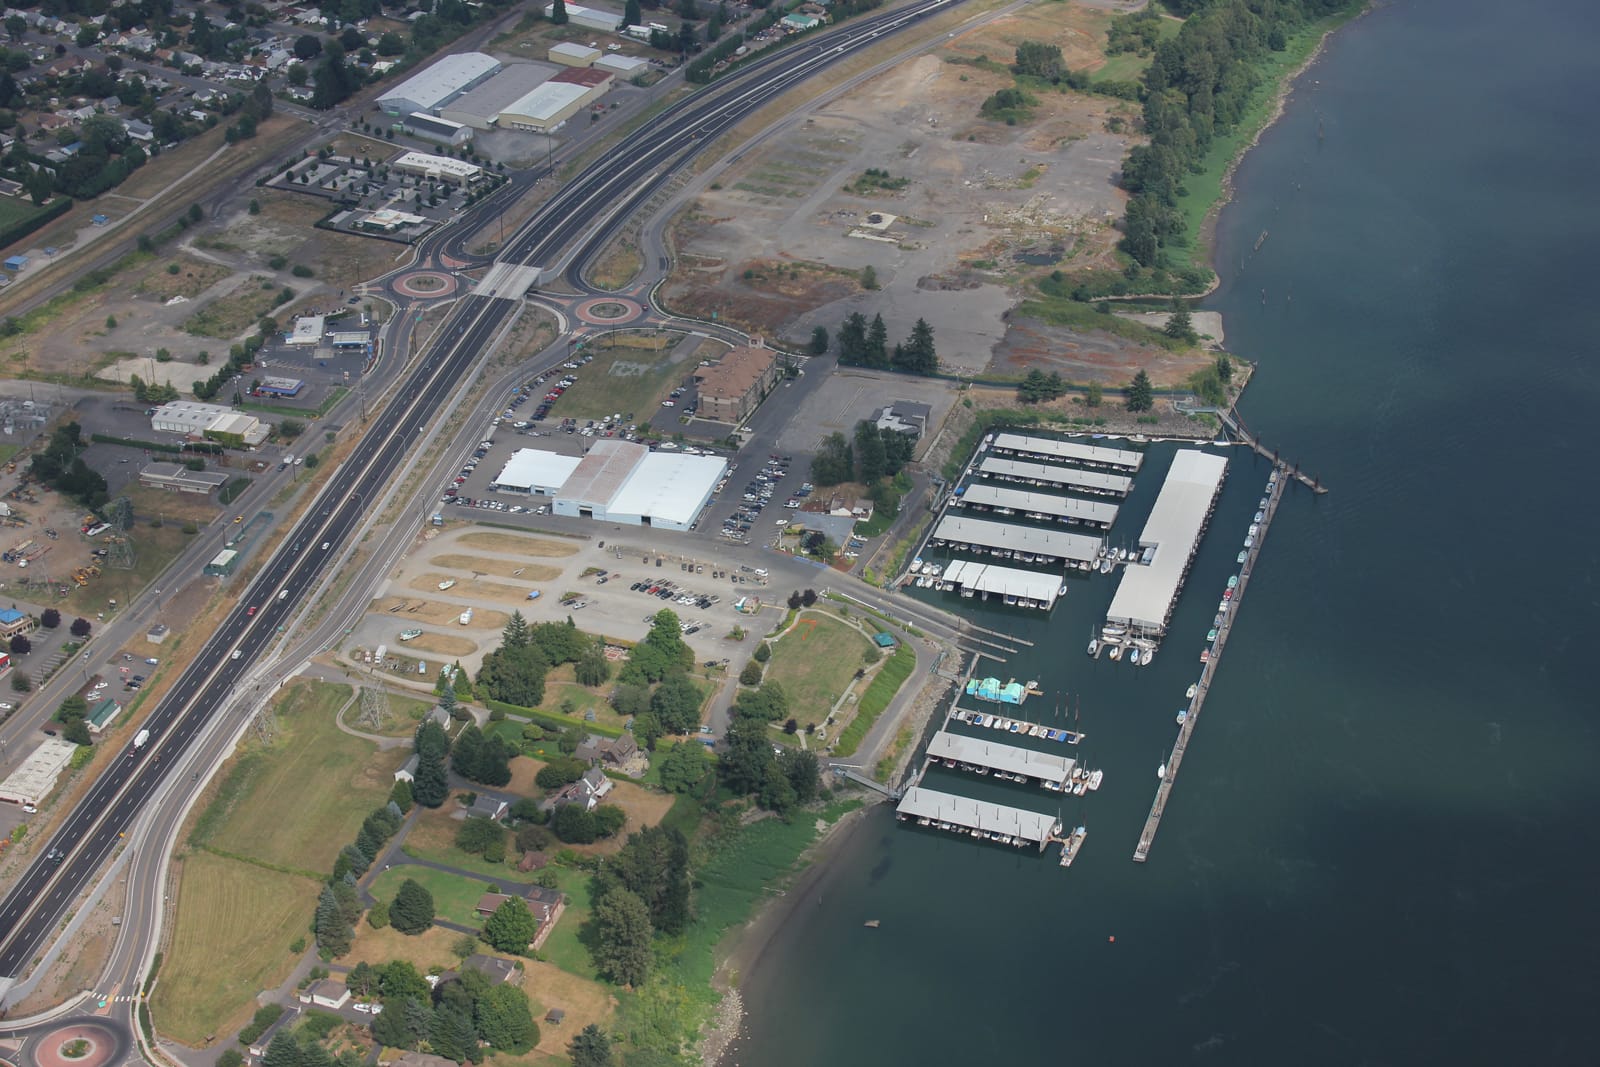 PSU Washougal A waterfront redevelopment project led by the Port of Camas-Washougal is about 1.7 miles away from Washougal's downtown.